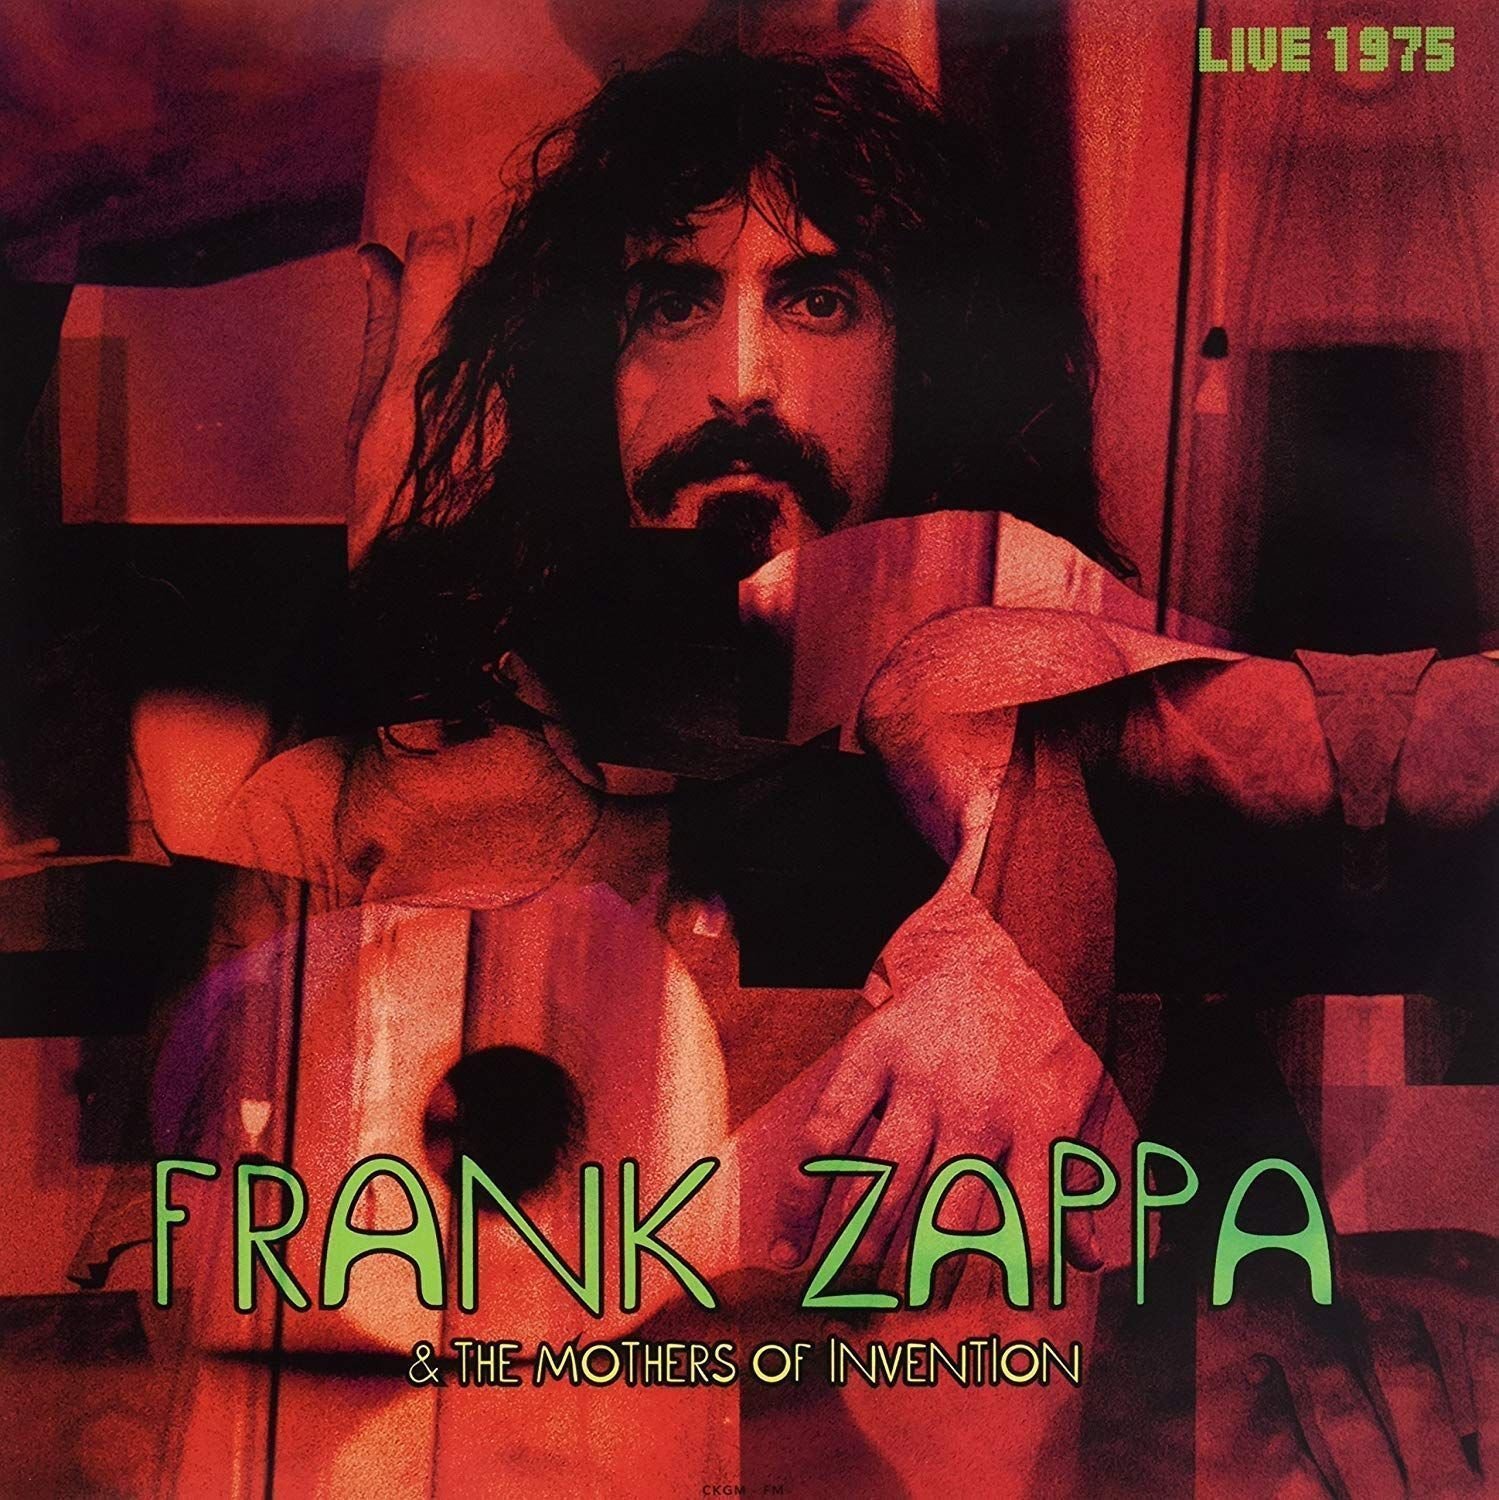 Грамофонна плоча Frank Zappa - Live 1975 (Frank Zappa & The Mothers Of Invention) (2 LP)